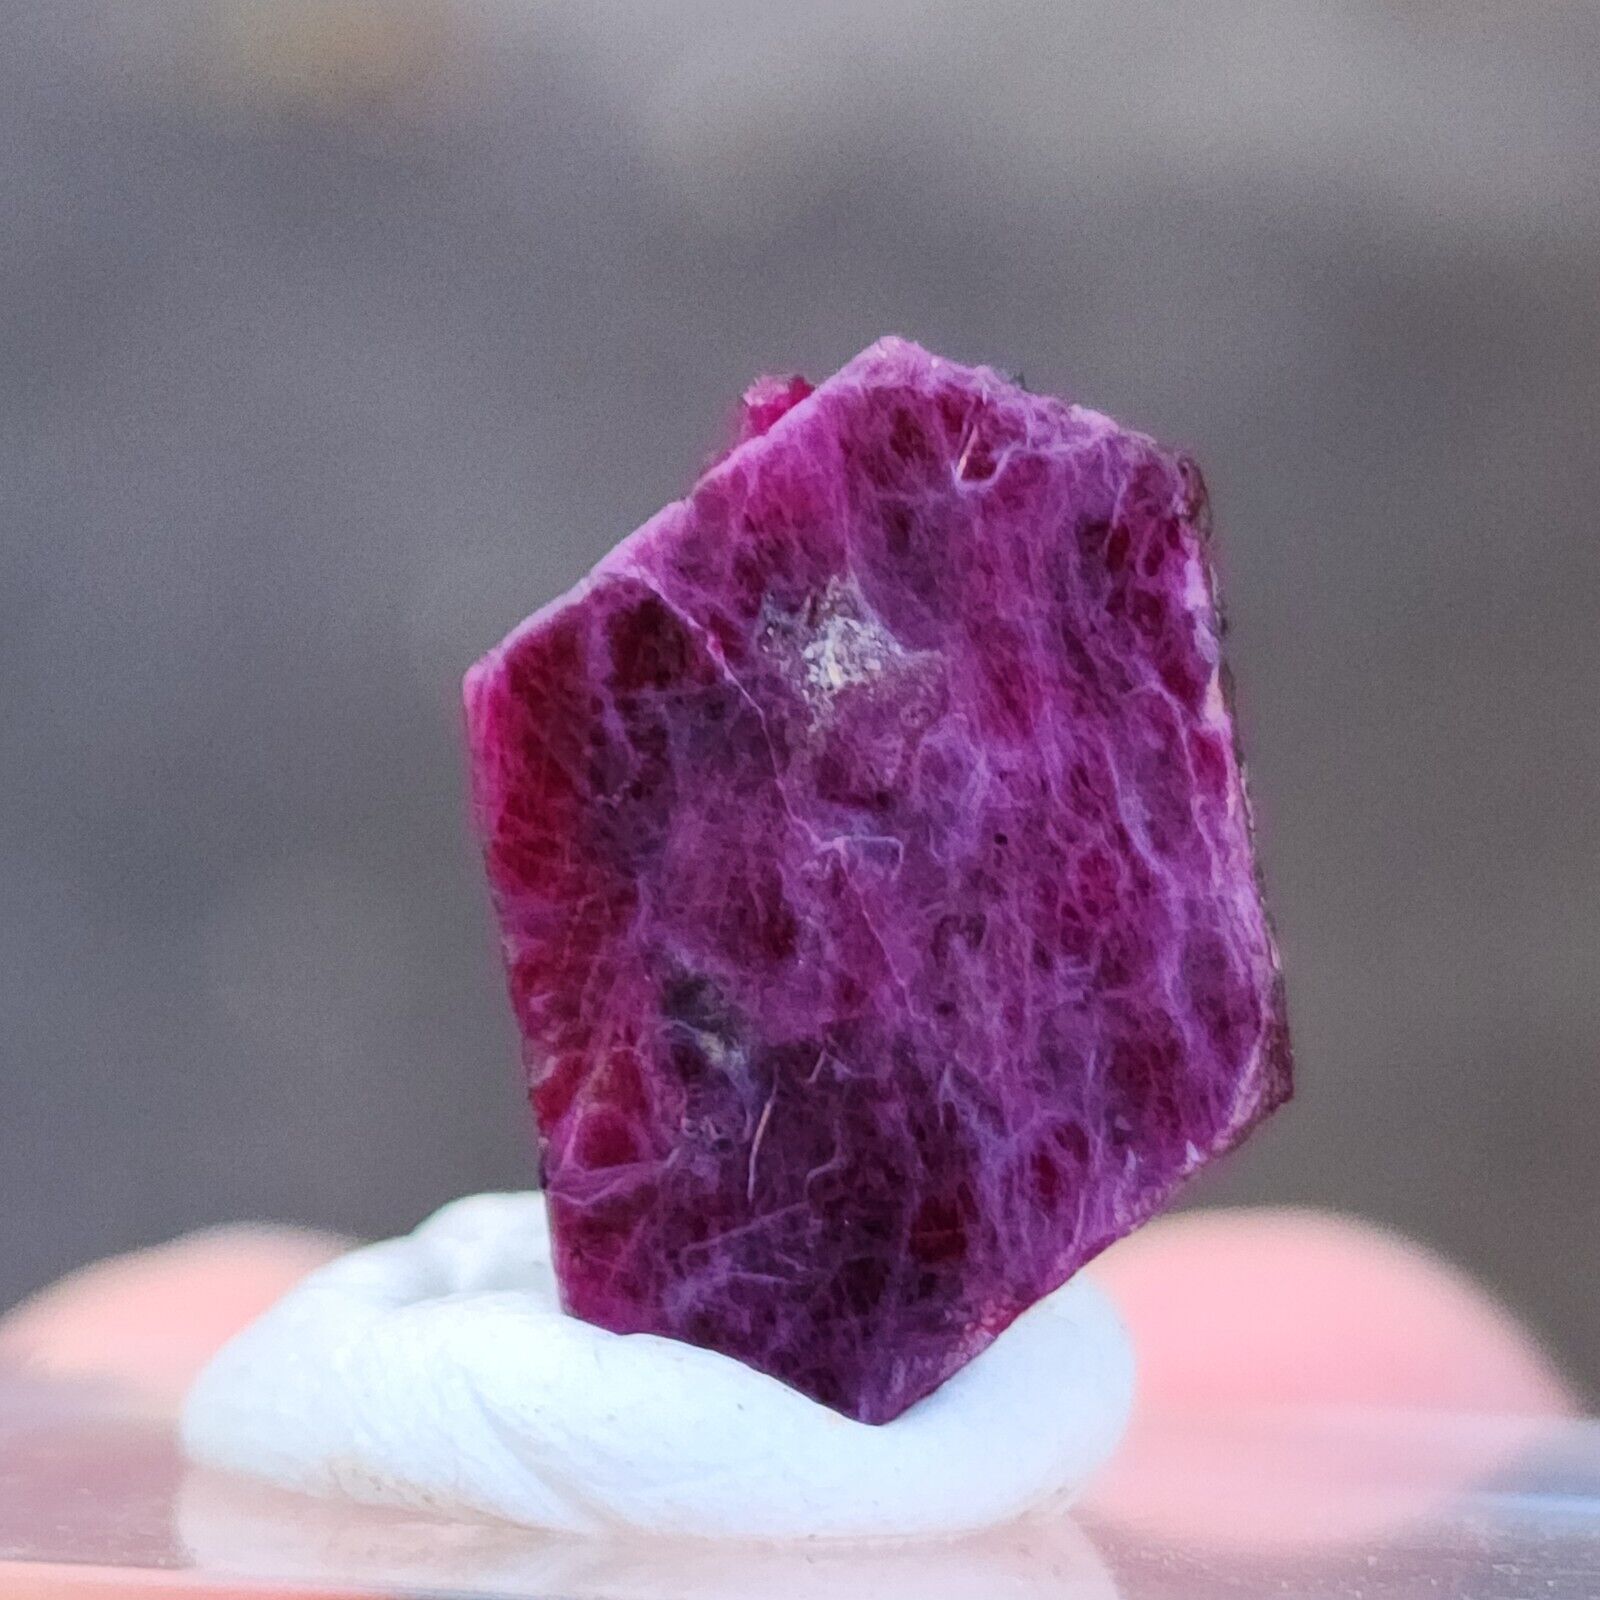 Super Rare Ruby Crystal from Tanzania, Dark Color Untreated Crystal, US Top Crys